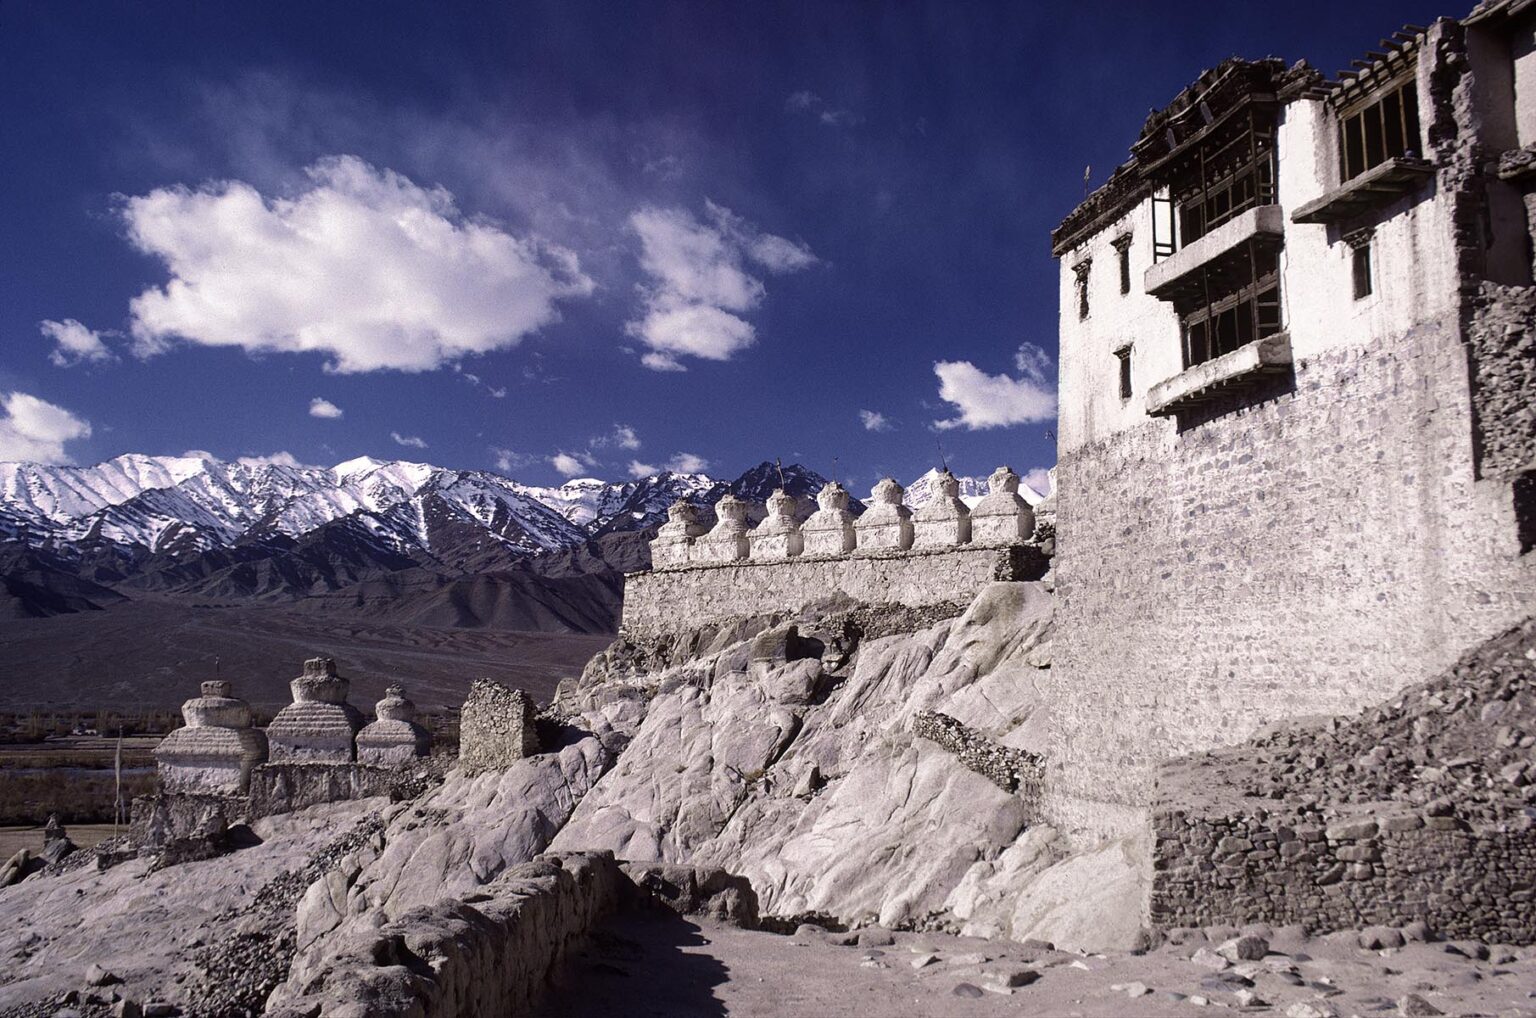 CHORTENS and the buildings of SHEY GOMPA (monastery), sit beneath HIMALAYAN PEAKS - LADAKH, INDIA